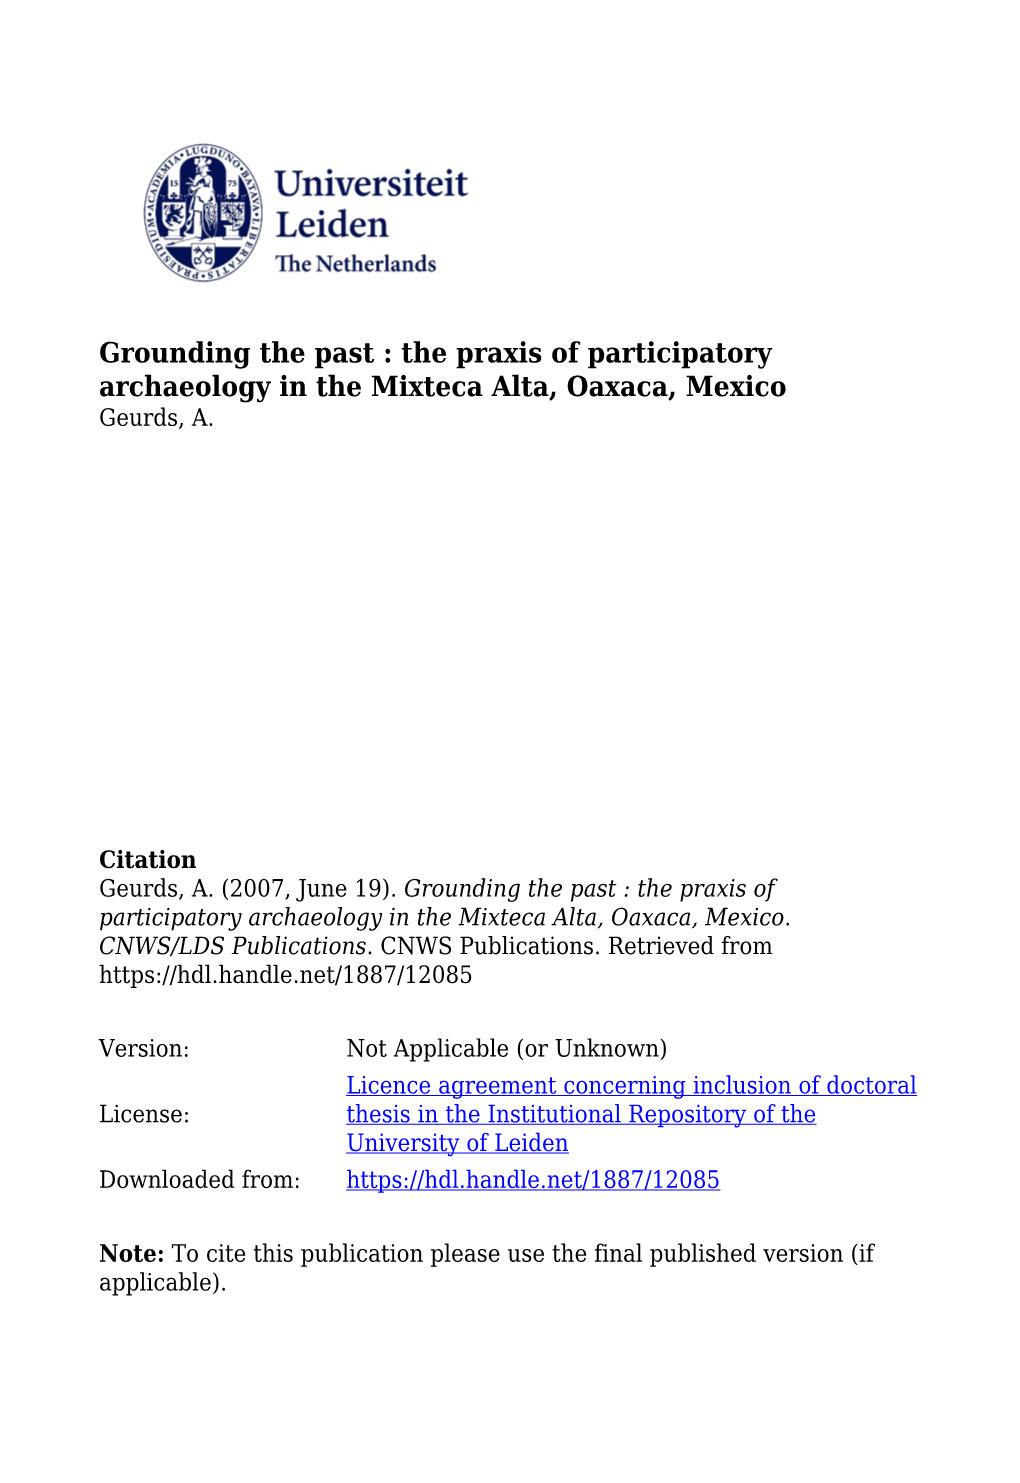 Grounding the Past : the Praxis of Participatory Archaeology in the Mixteca Alta, Oaxaca, Mexico Geurds, A